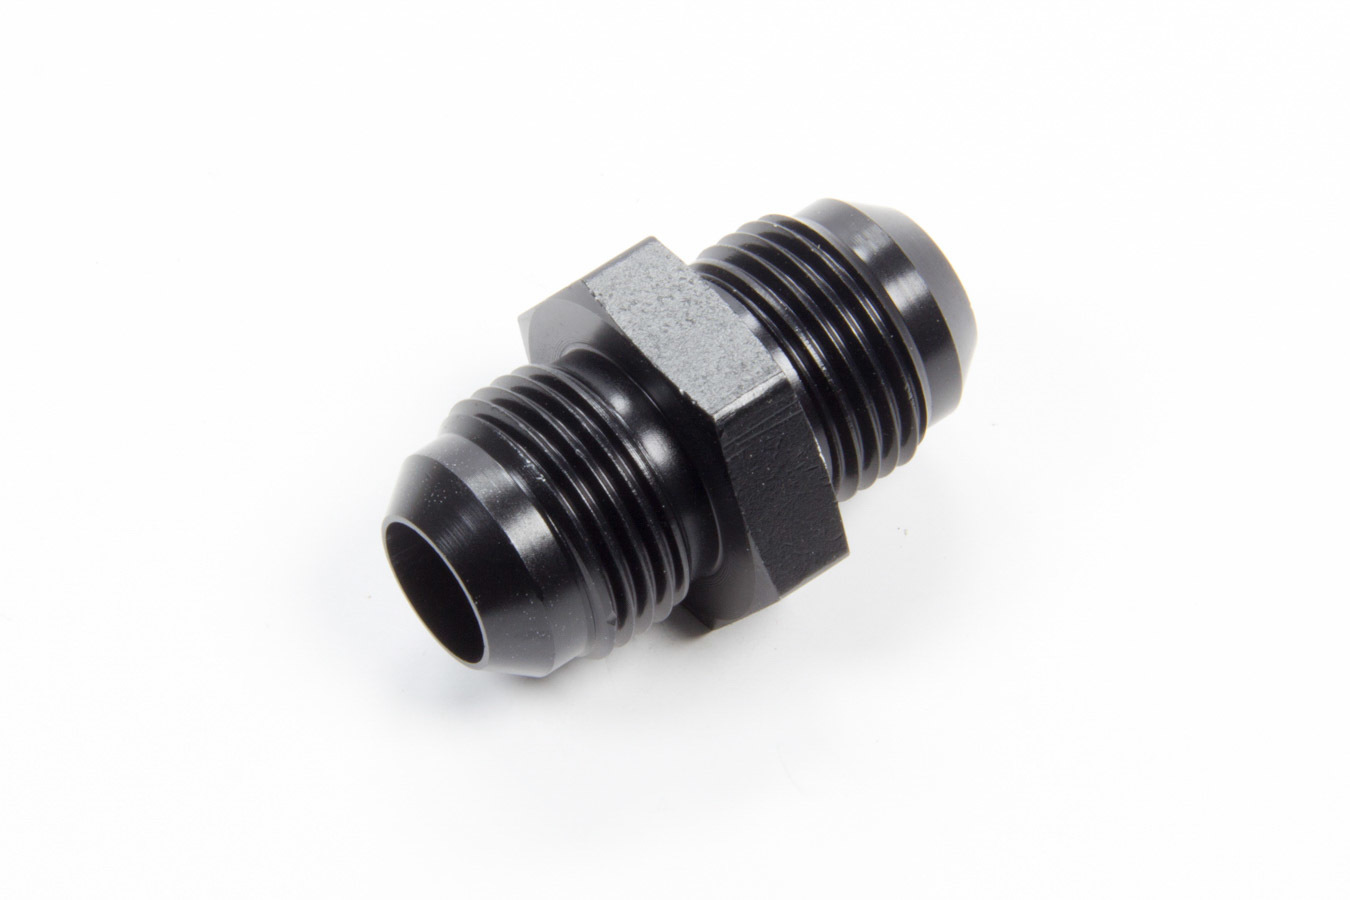 Aeroquip FCM5054 Fitting, Adapter, Straight, 10 AN Male to 10 AN Male, Aluminum, Black Anodized, Each